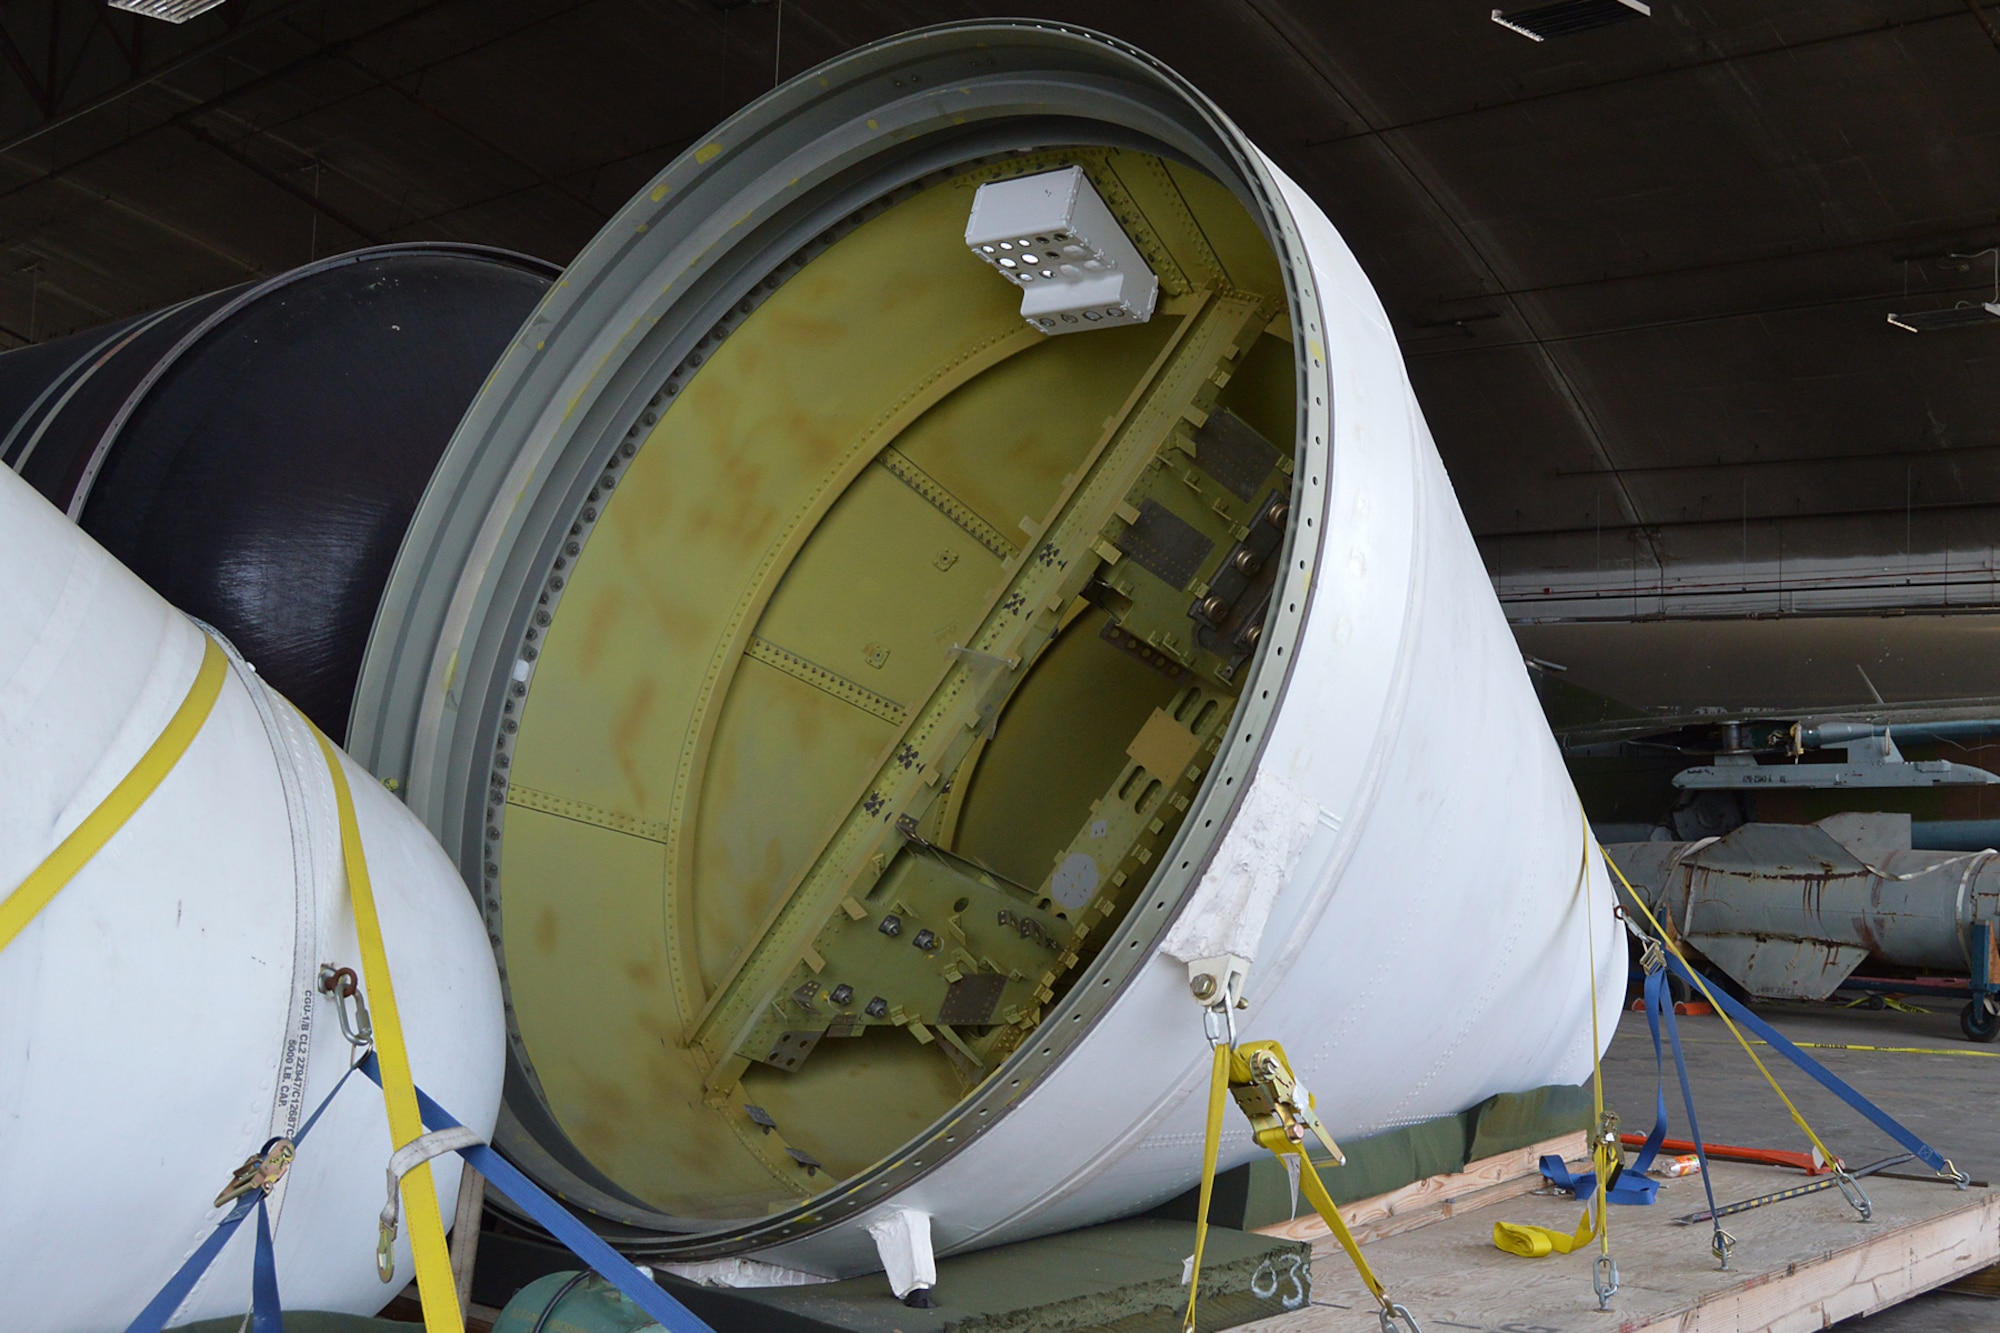 DAYTON, Ohio -- The Titan IVB space launch vehicle in the restoration hangar at the National Museum of the United States Air Force. These are nose cones from the solid rocket motor units. (U.S. Air Force photo)
